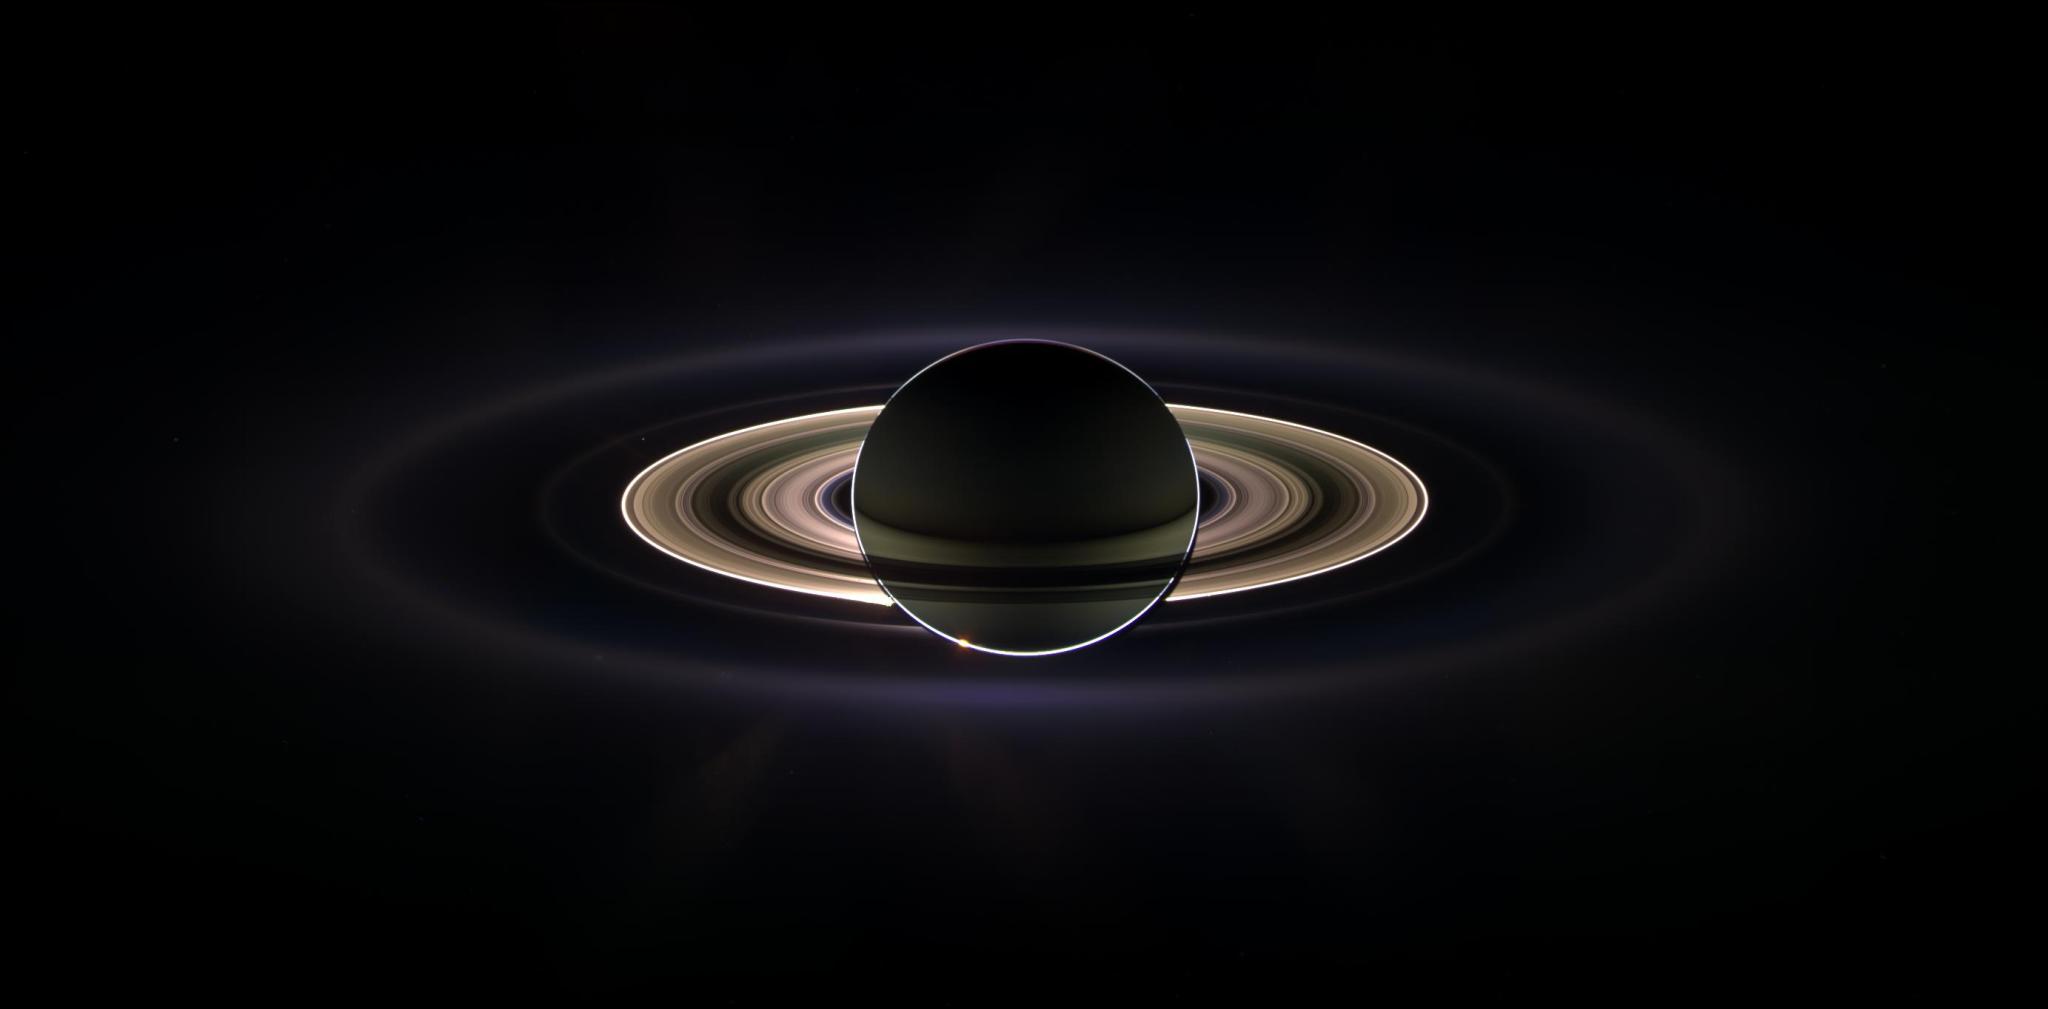 Saturn as seen from Cassini